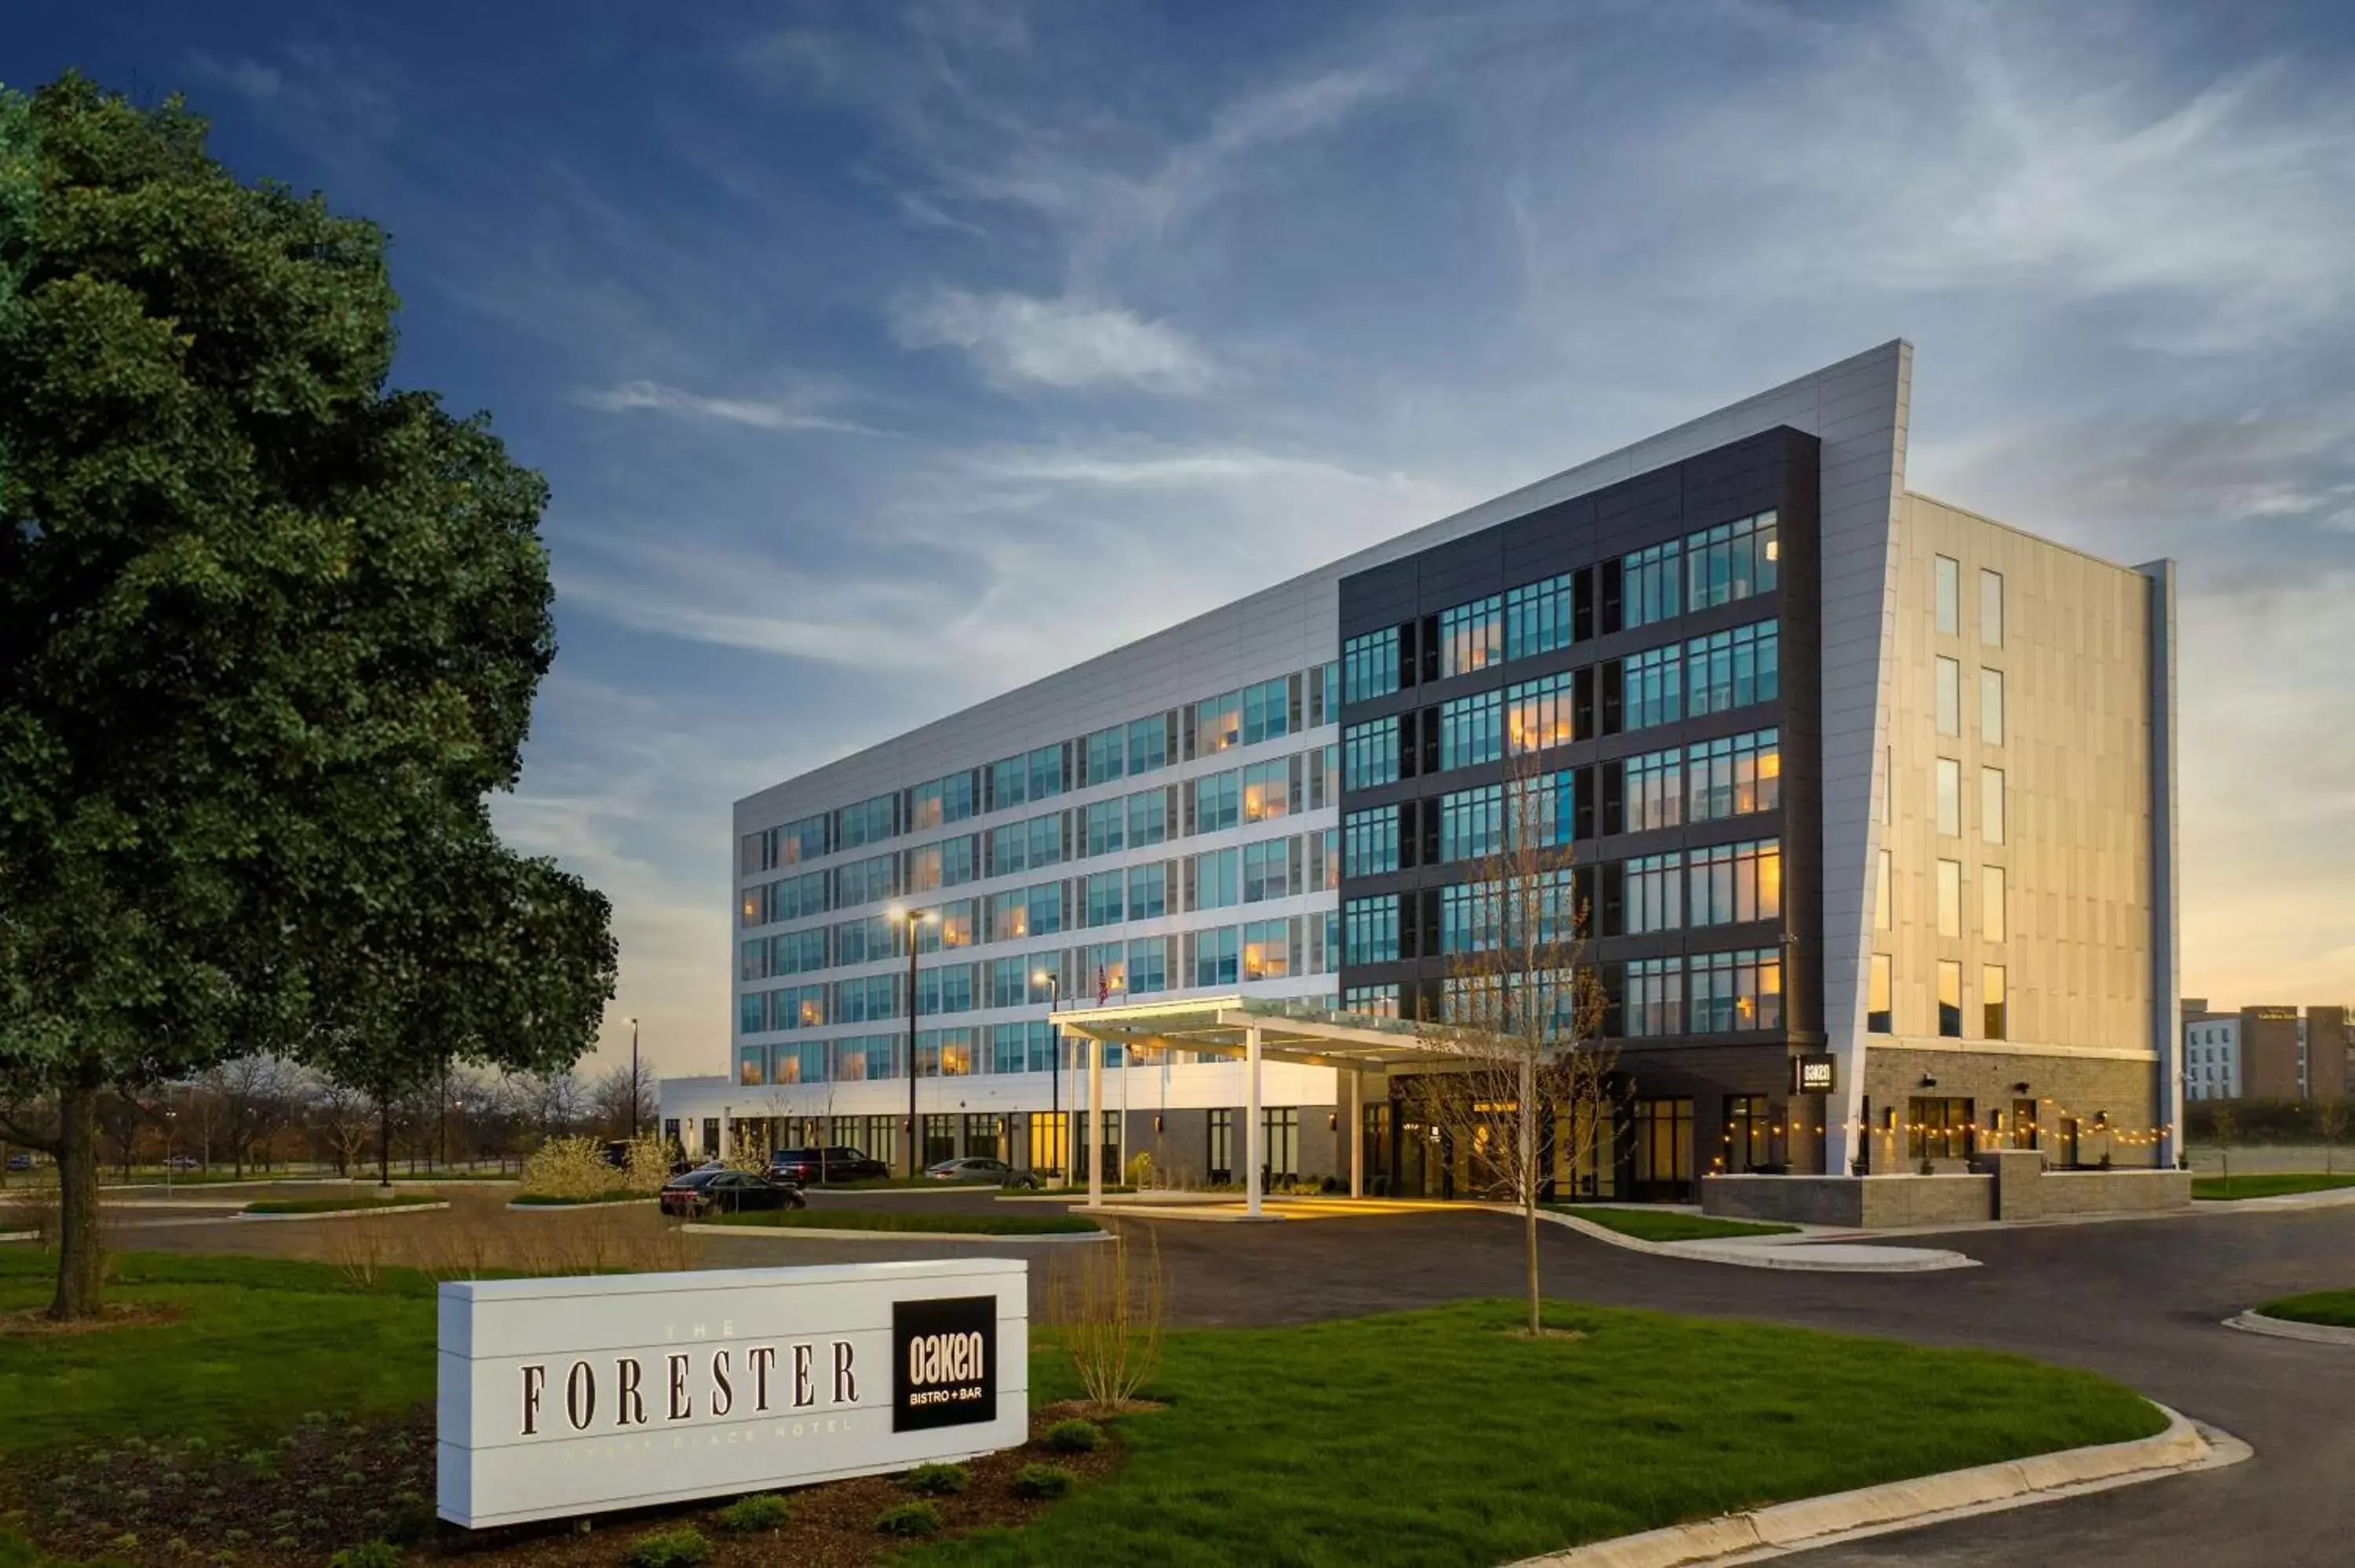 Property Building in The Forester, a Hyatt Place Hotel